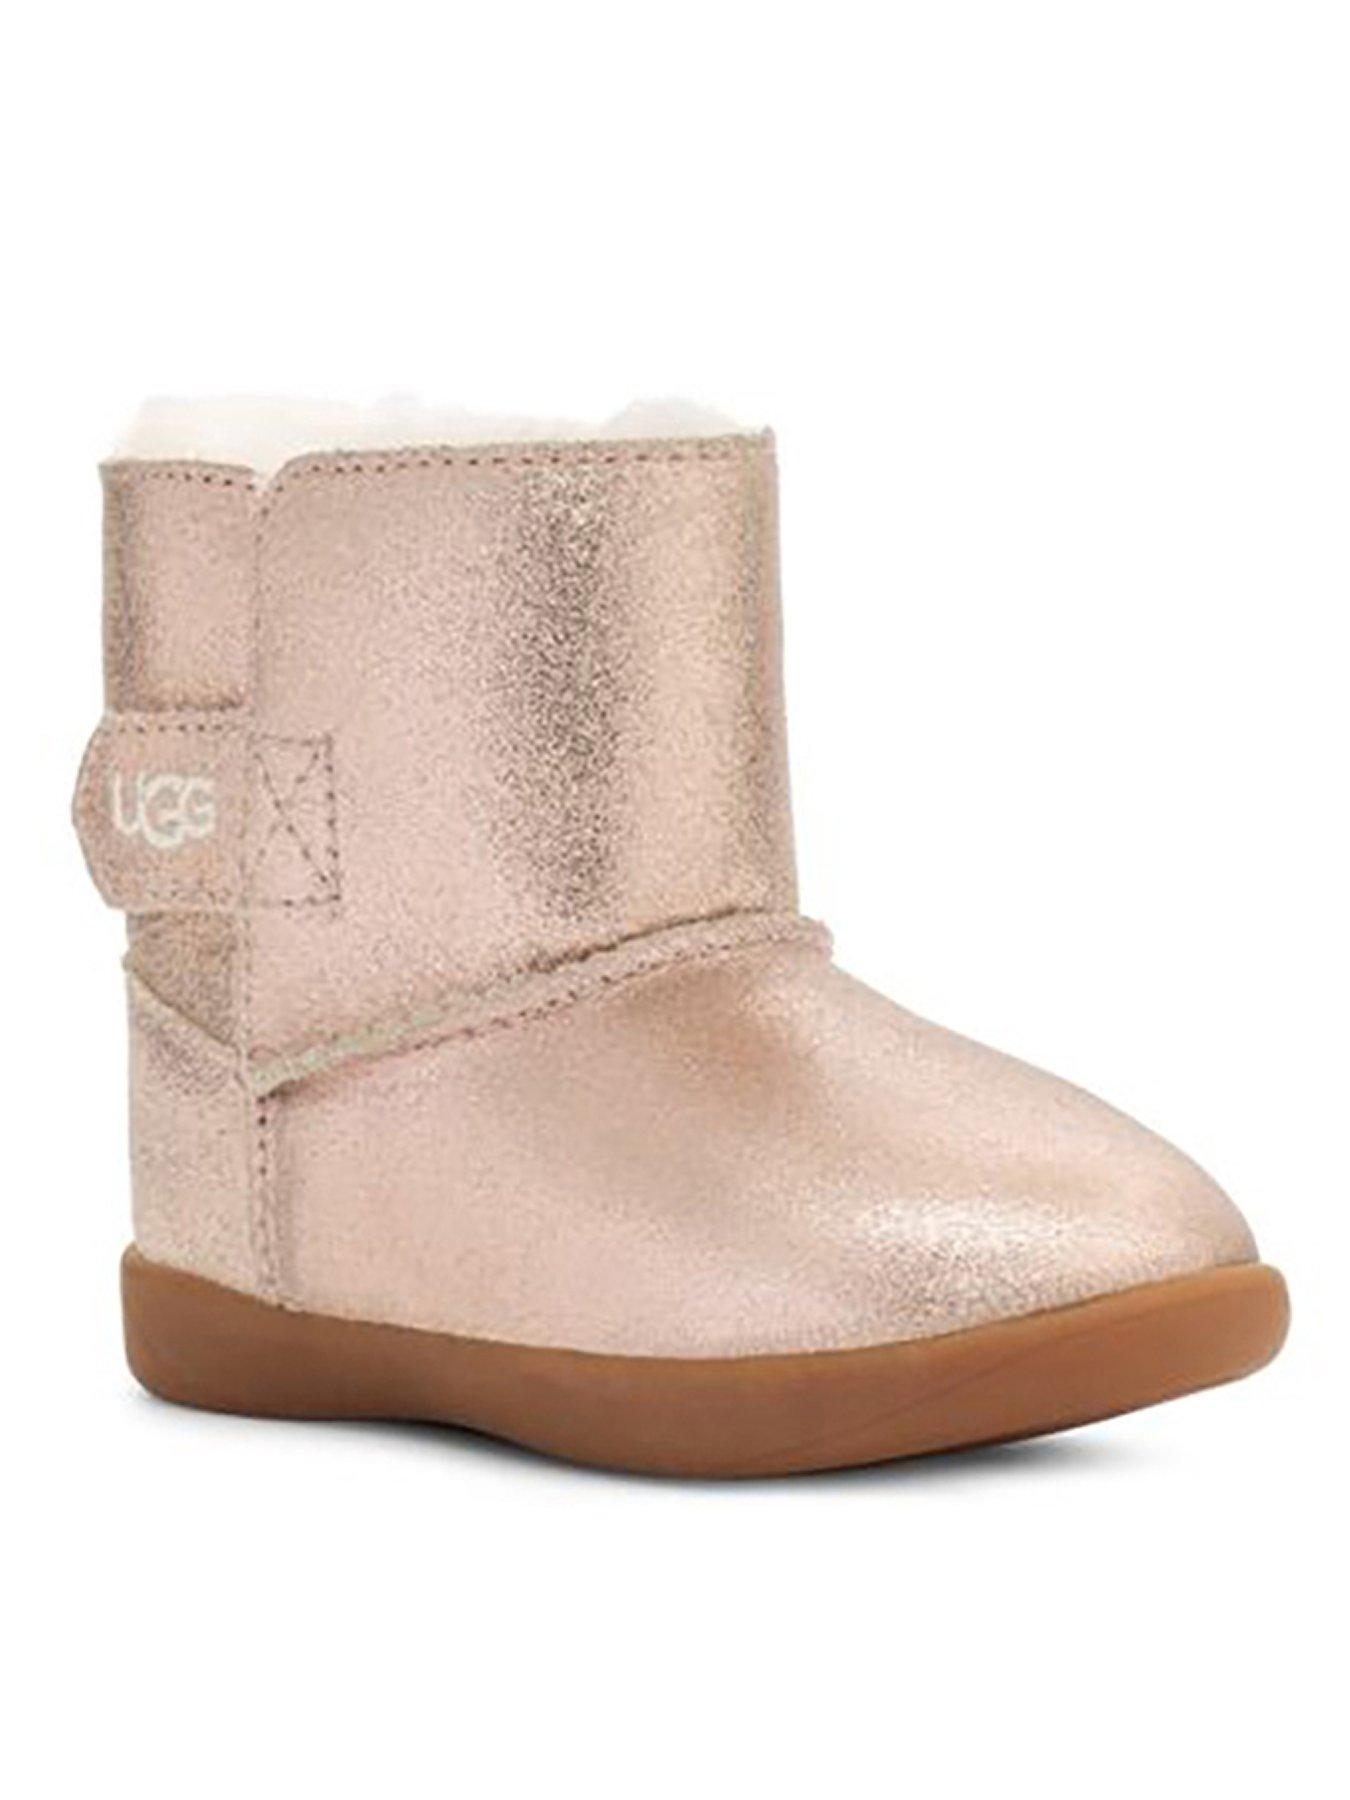 toddler uggs sale size 11